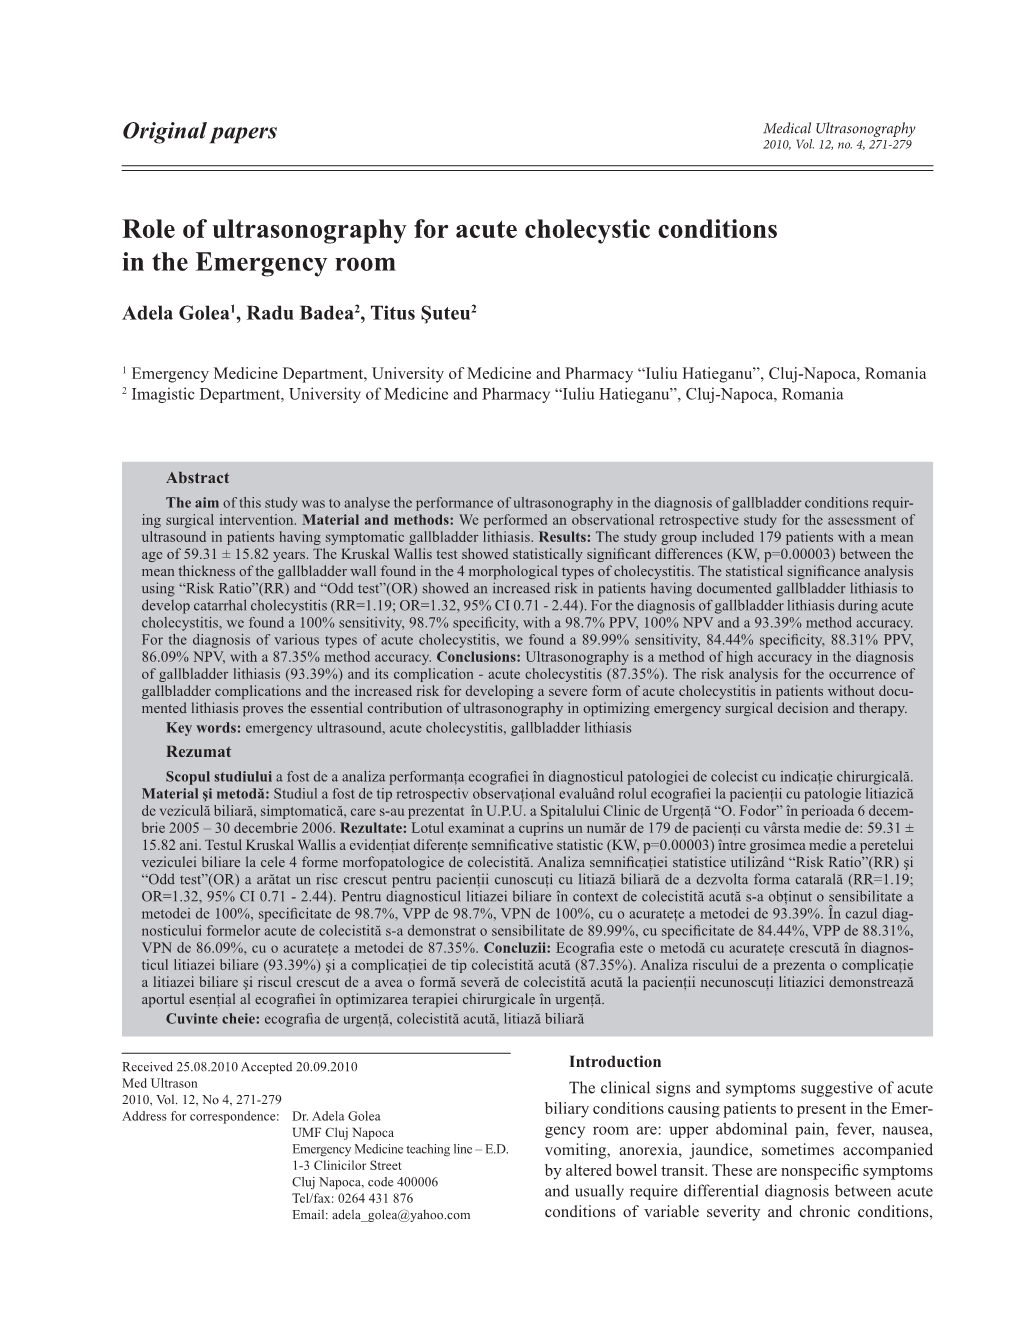 Role of Ultrasonography for Acute Cholecystic Conditions in the Emergency Room